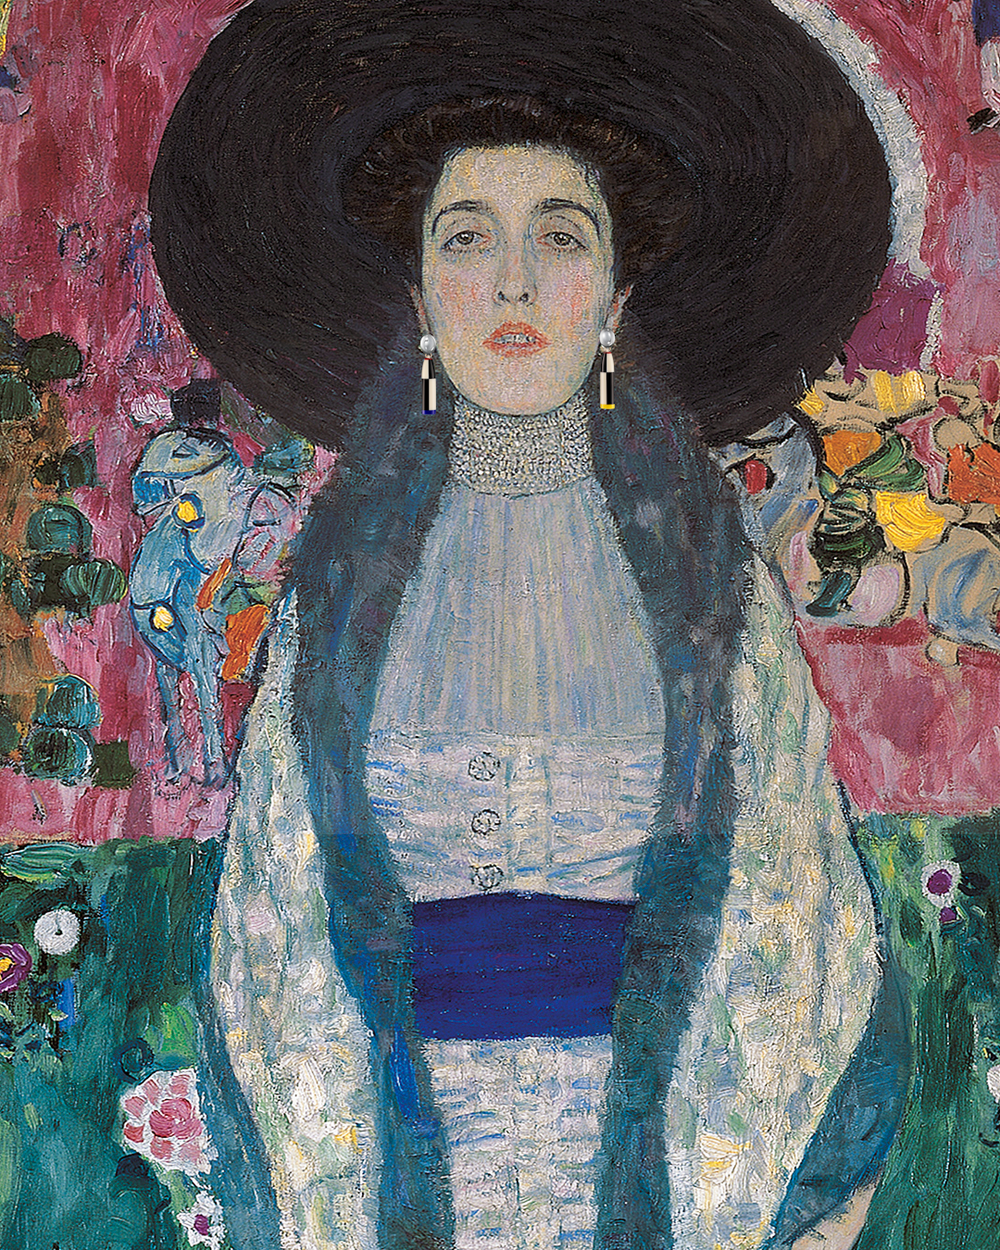 Art-time-travelling-with- Klimt - 1912.png